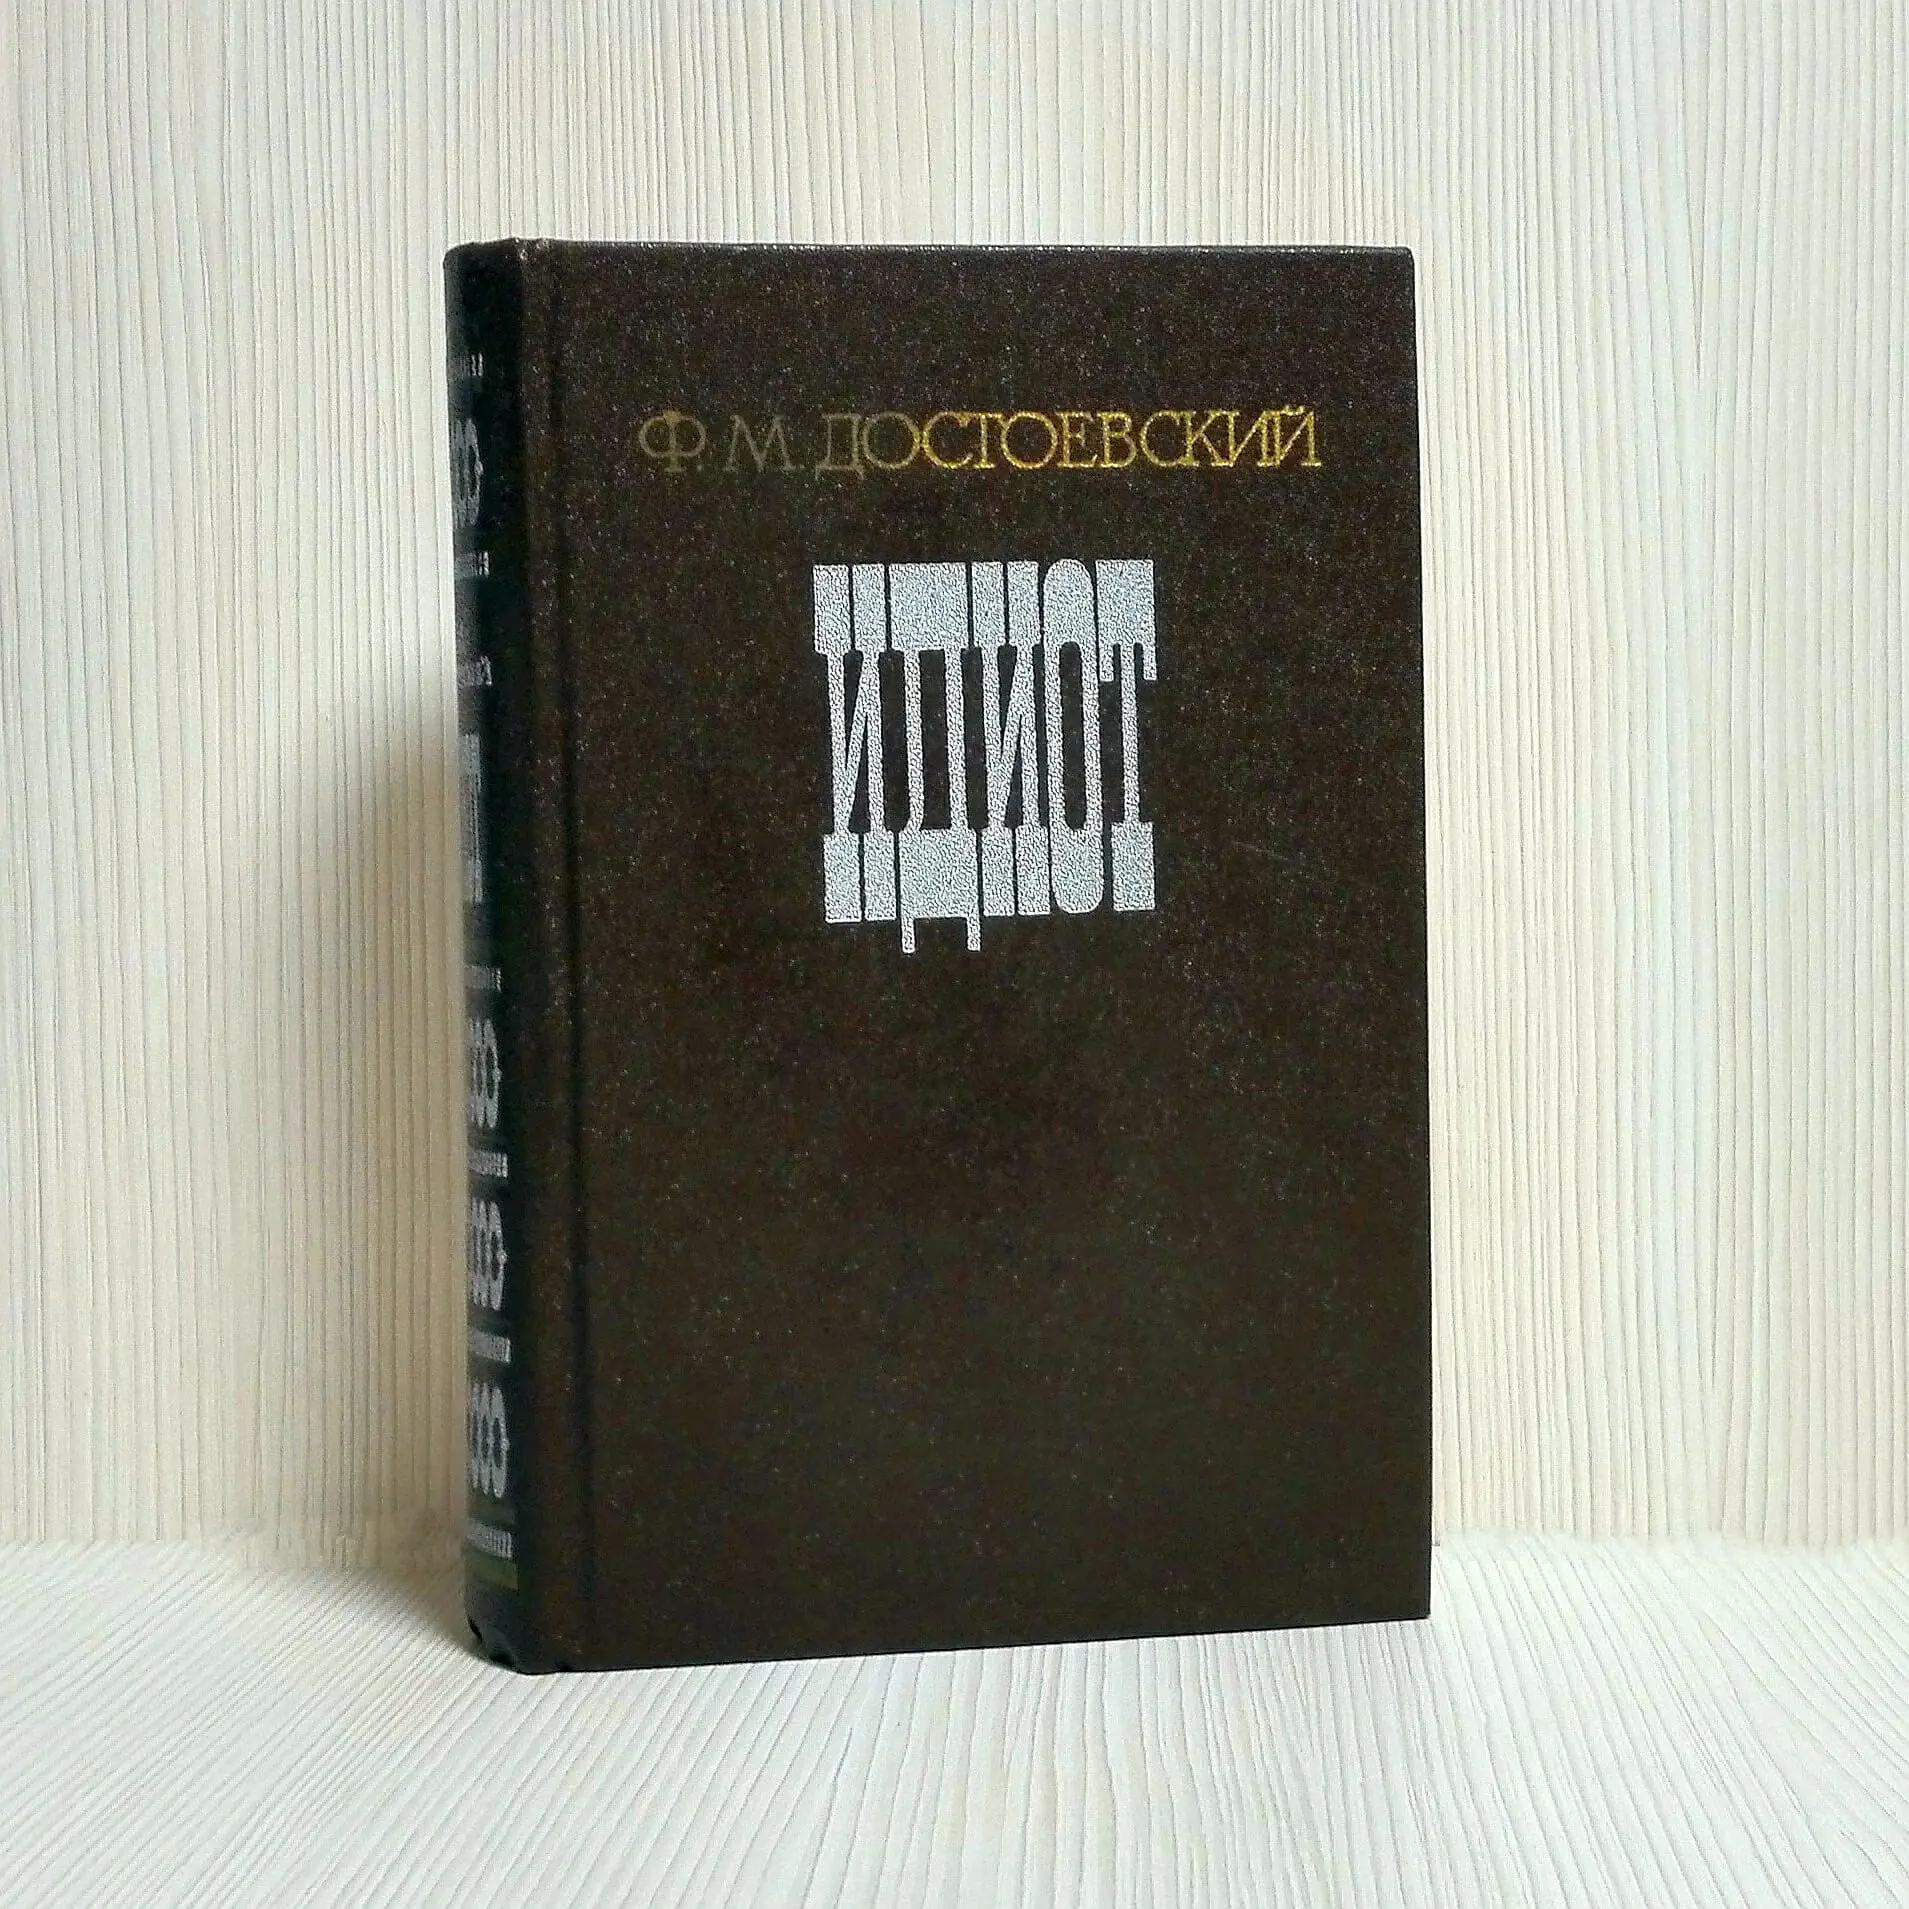 Dostoevsky Novel the Idiot Soviet Vintage Book. Book in Russian